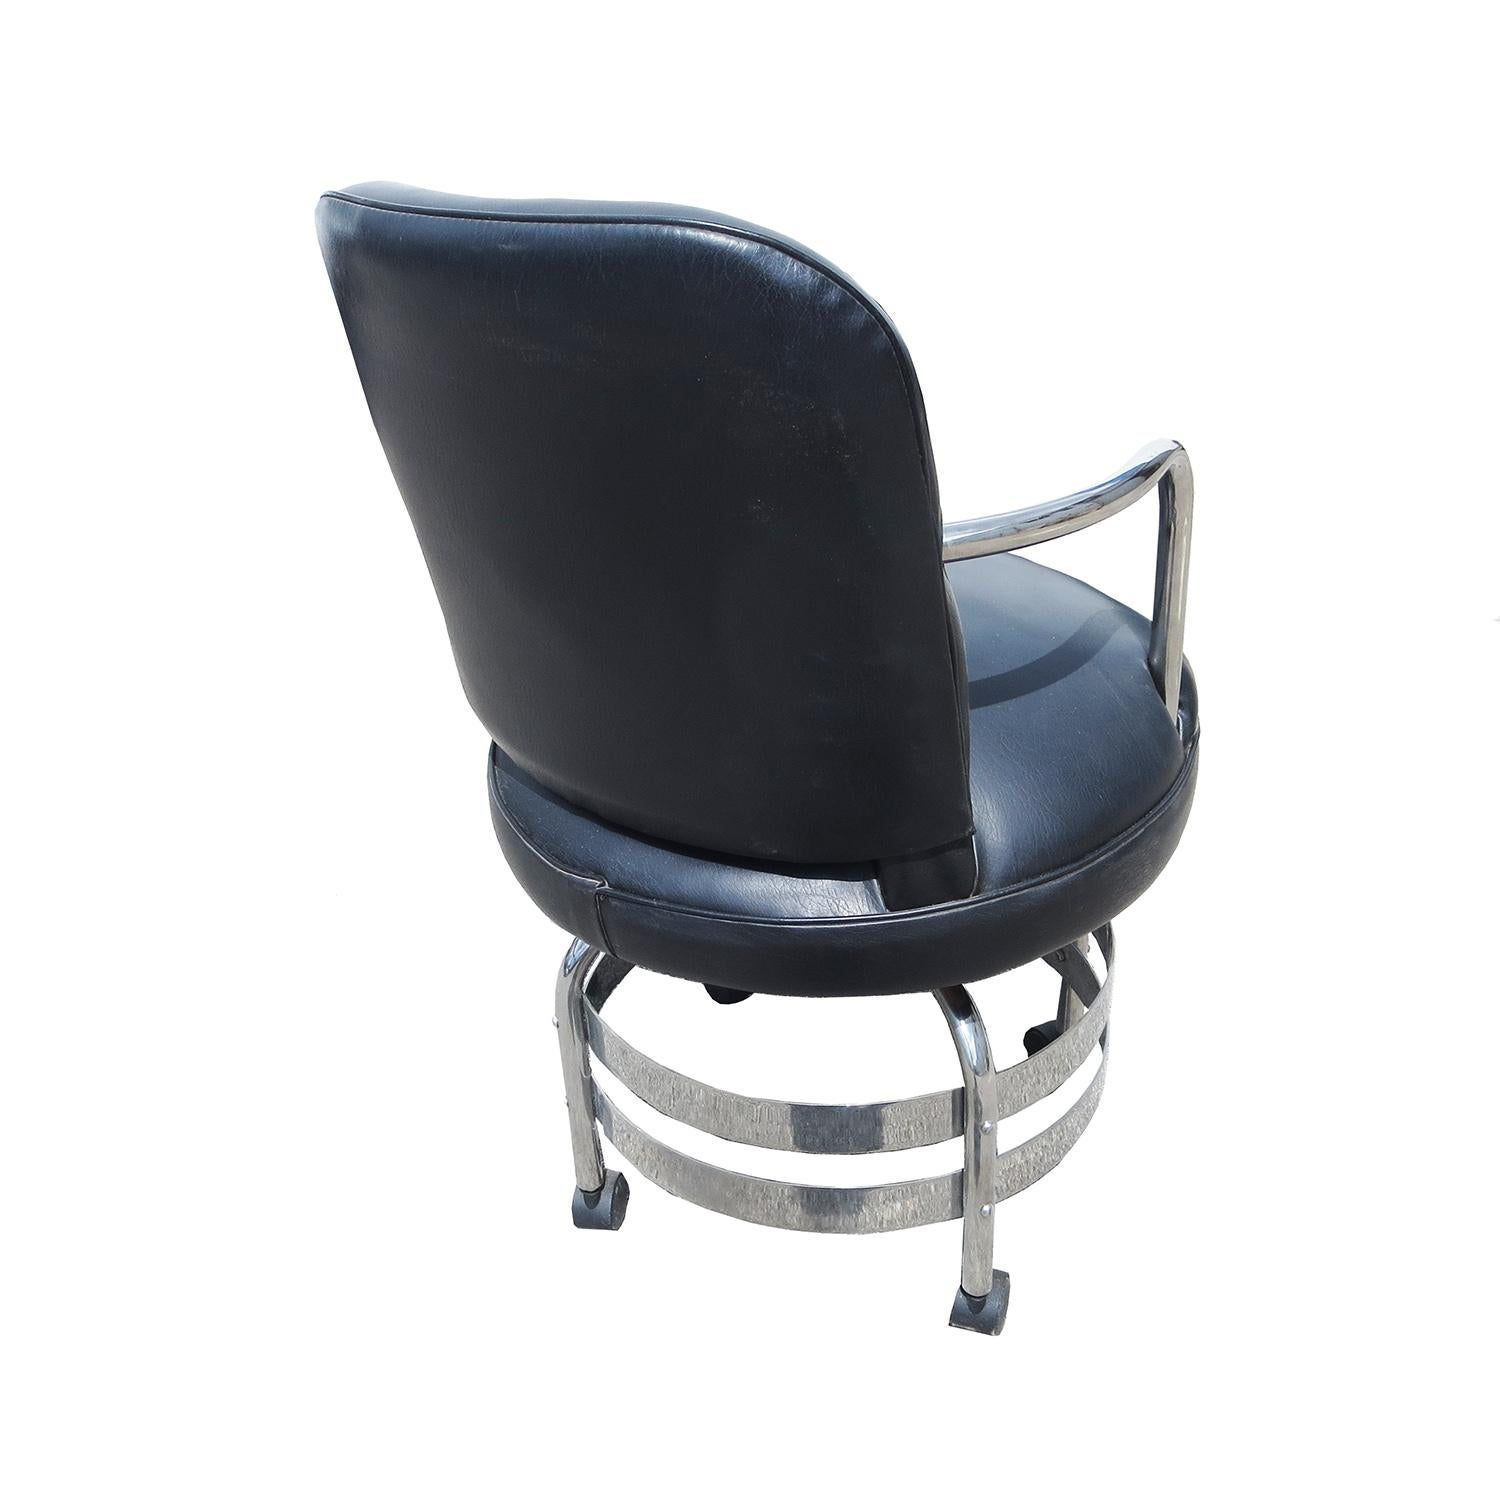 Put a little style into your workday with this fantastic Art Deco desk chair. The frame is a combination of tubular and flat banded chromed steel. The upholstery is black leatherette. The chair swivels, and will adjust in height by continued